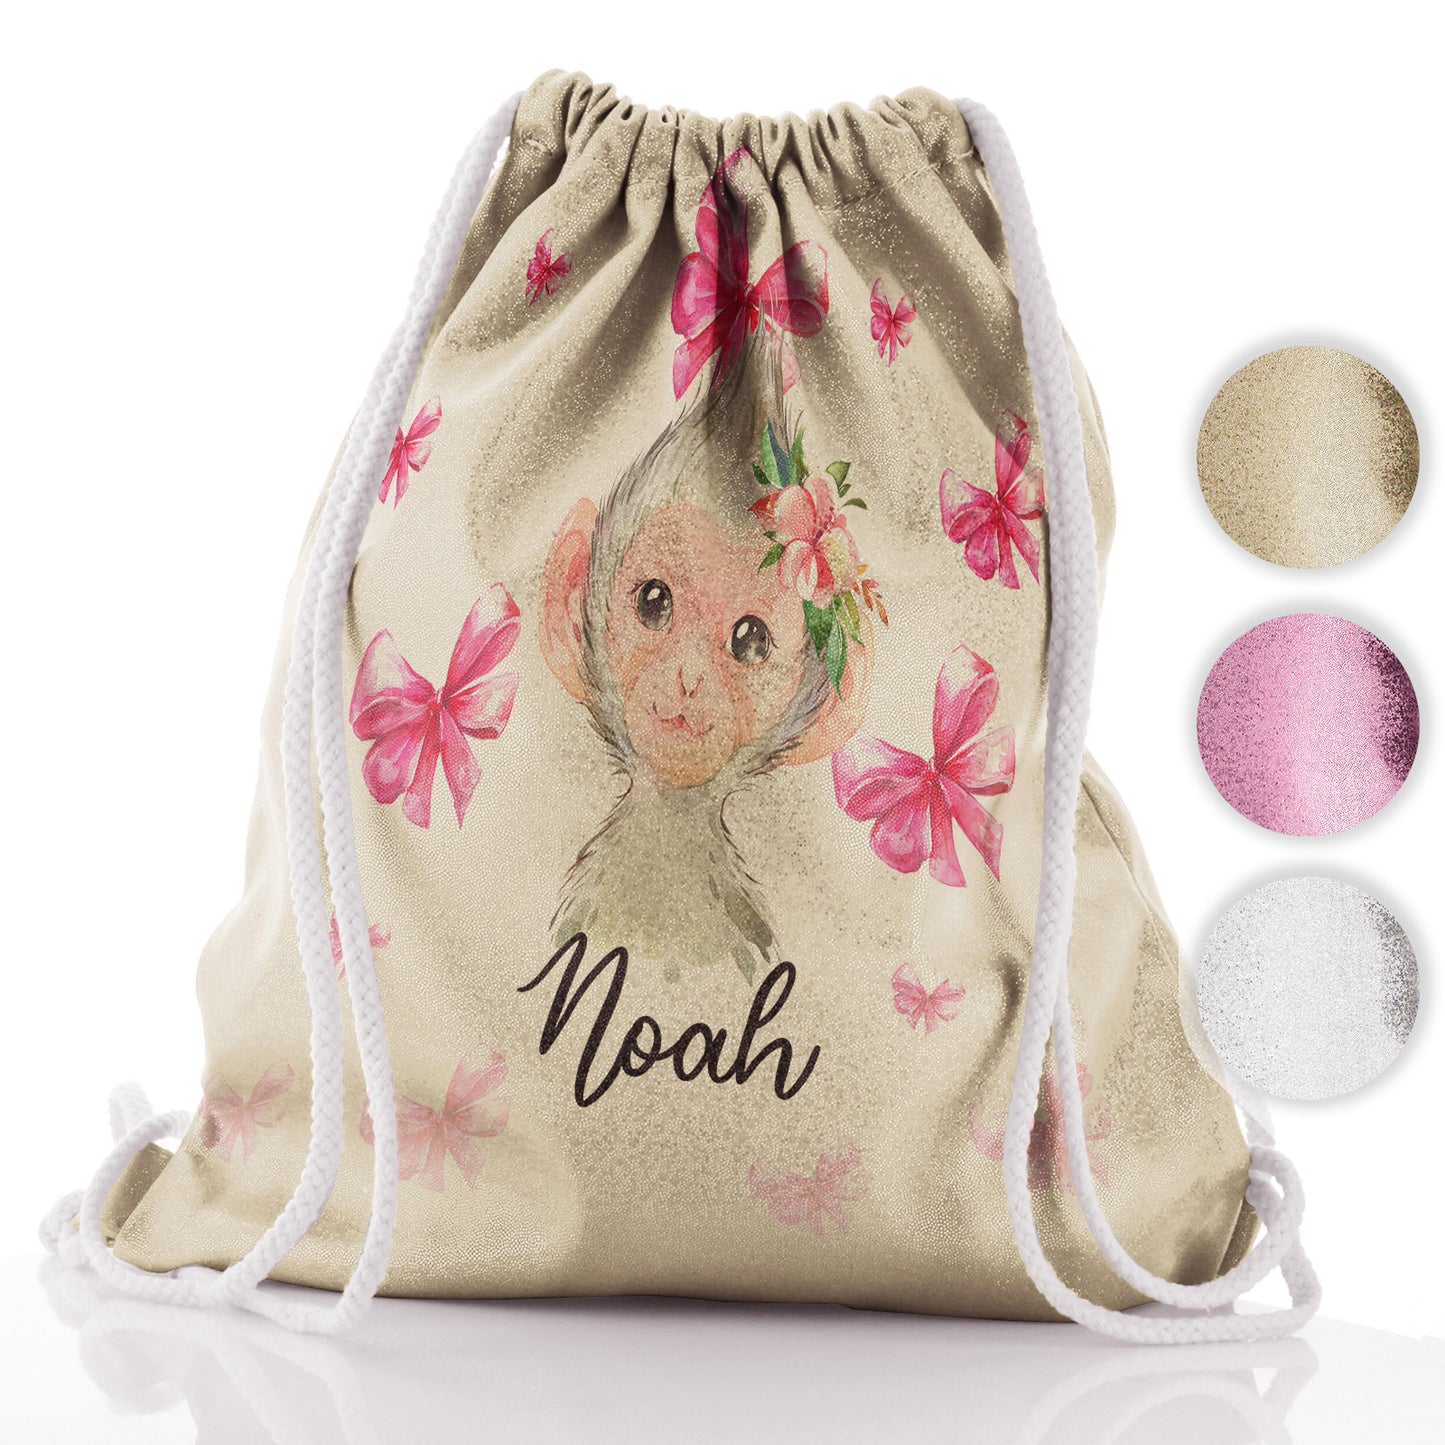 Personalised Glitter Drawstring Backpack with Monkey Pink Bows and Cute Text